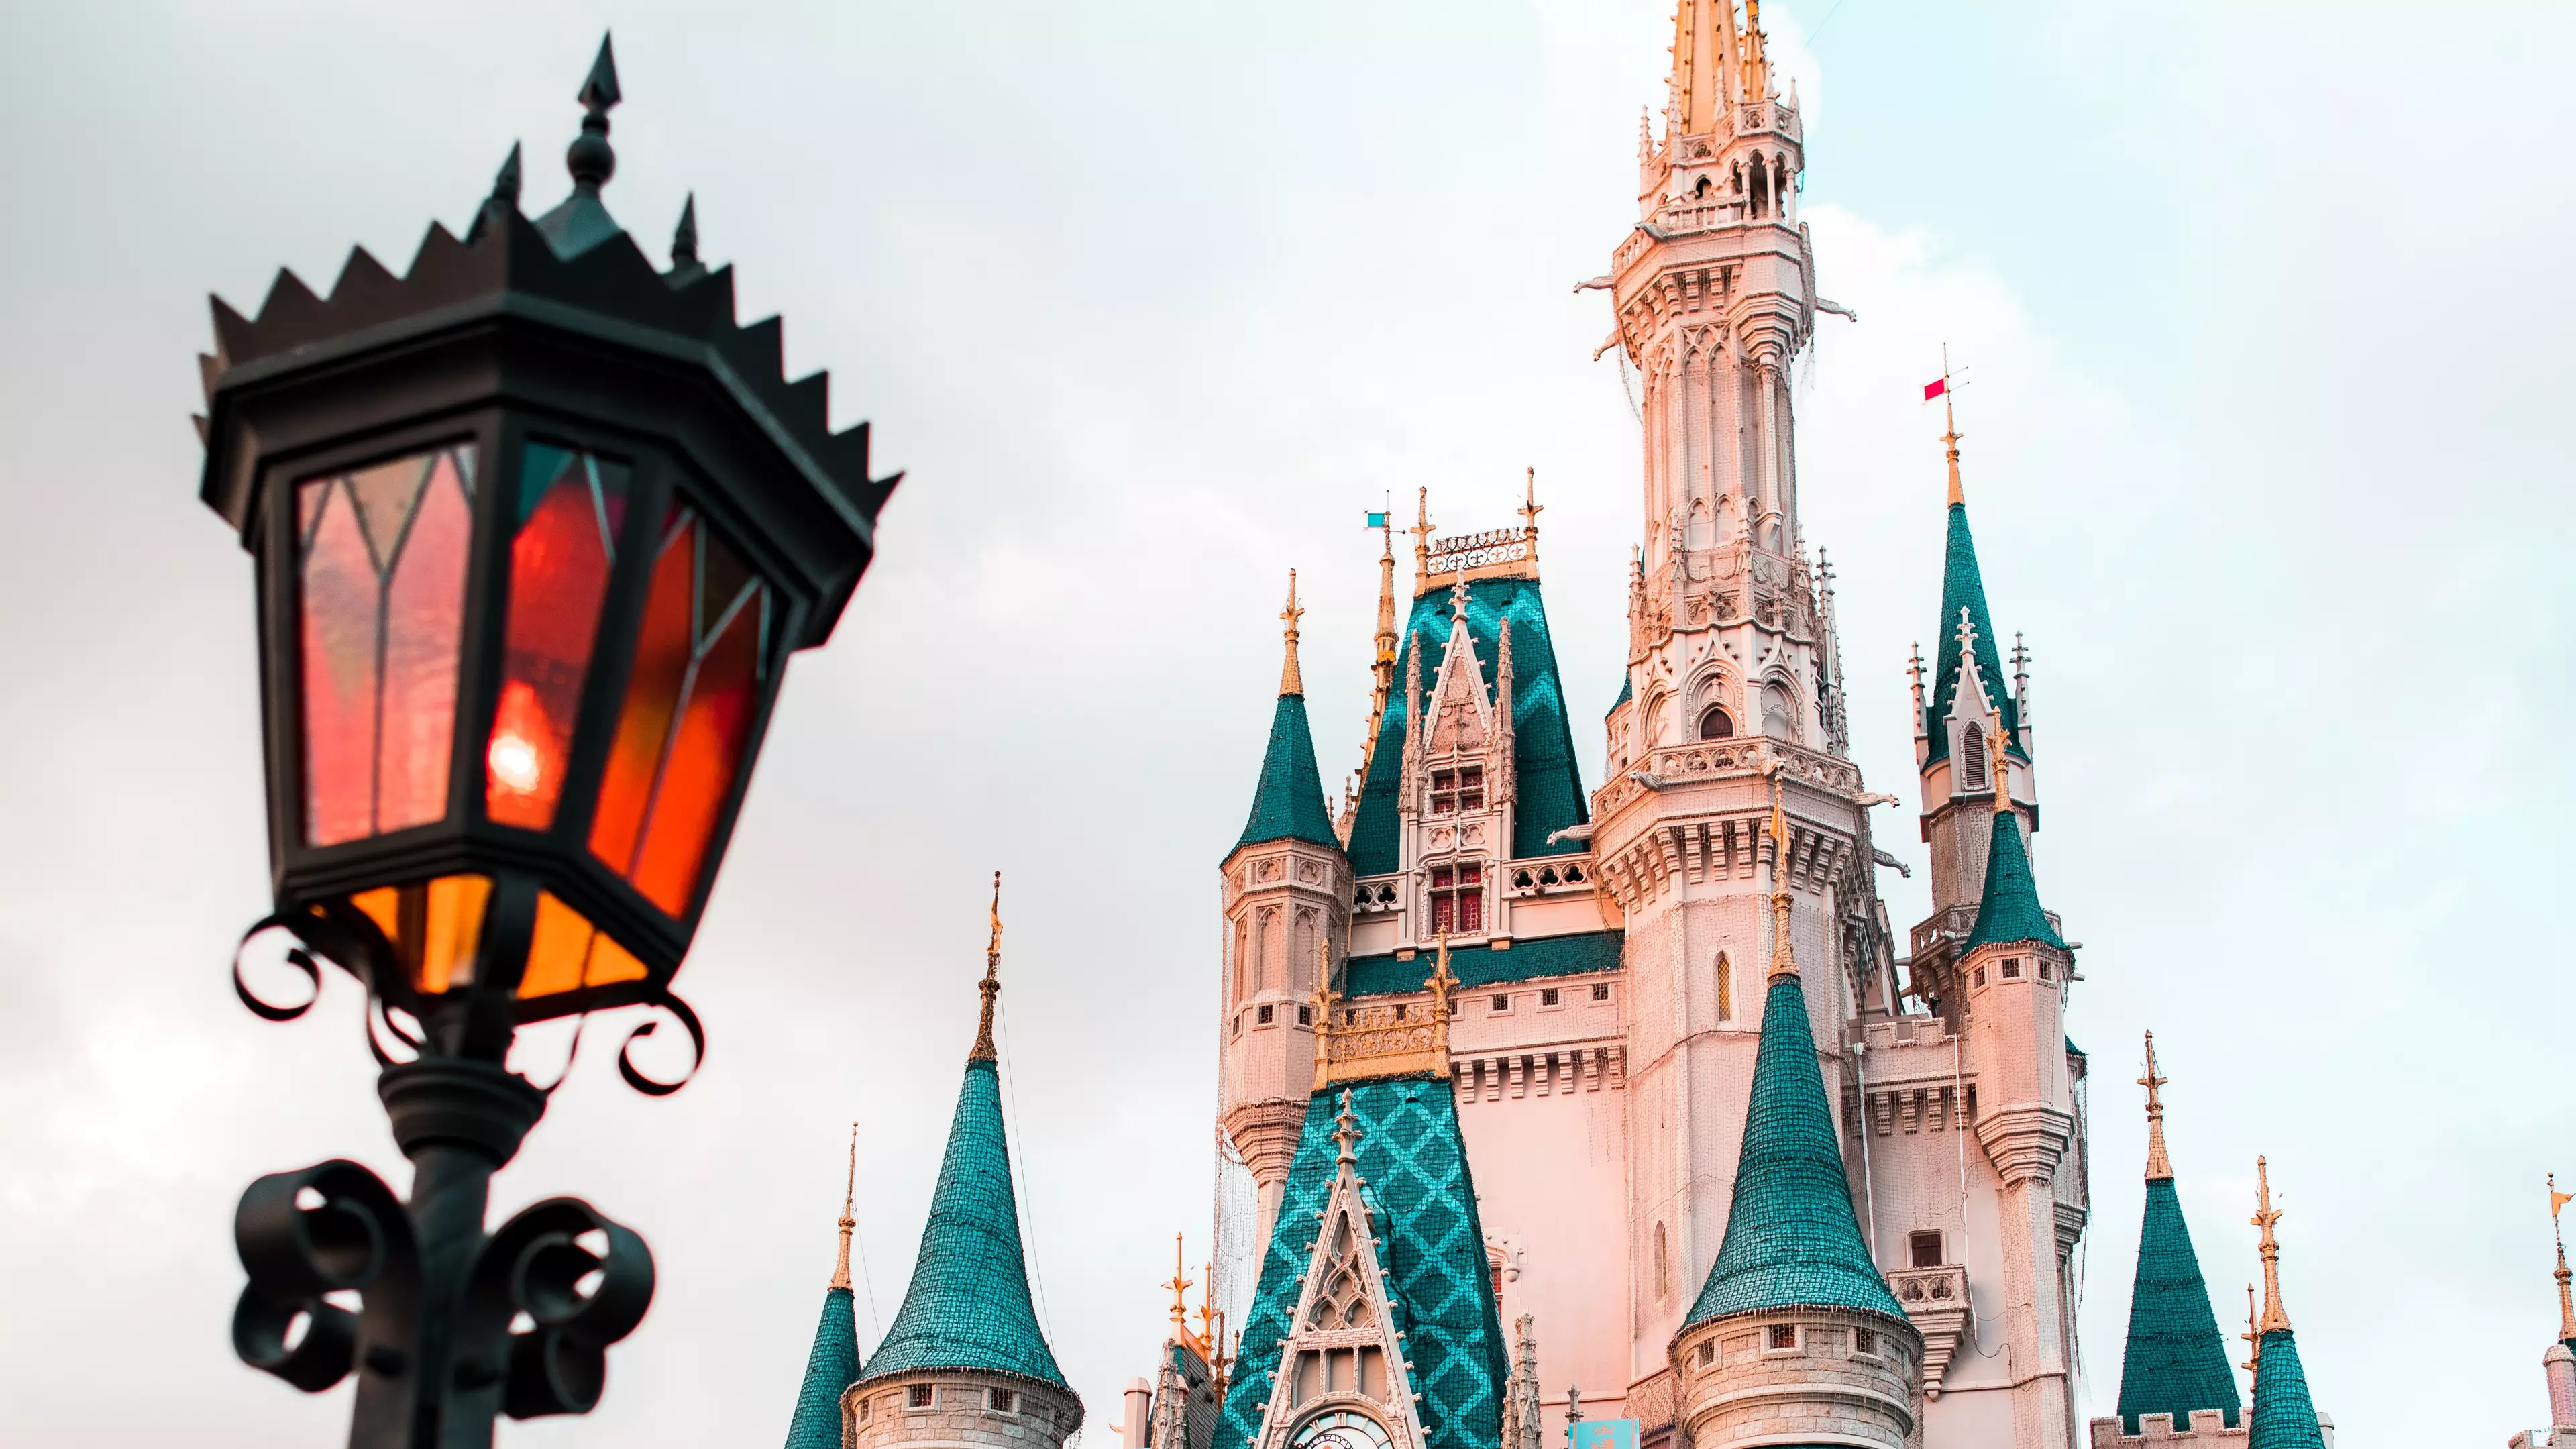 Woman Claims Visitors Without Children Should Be Banned From Disney World